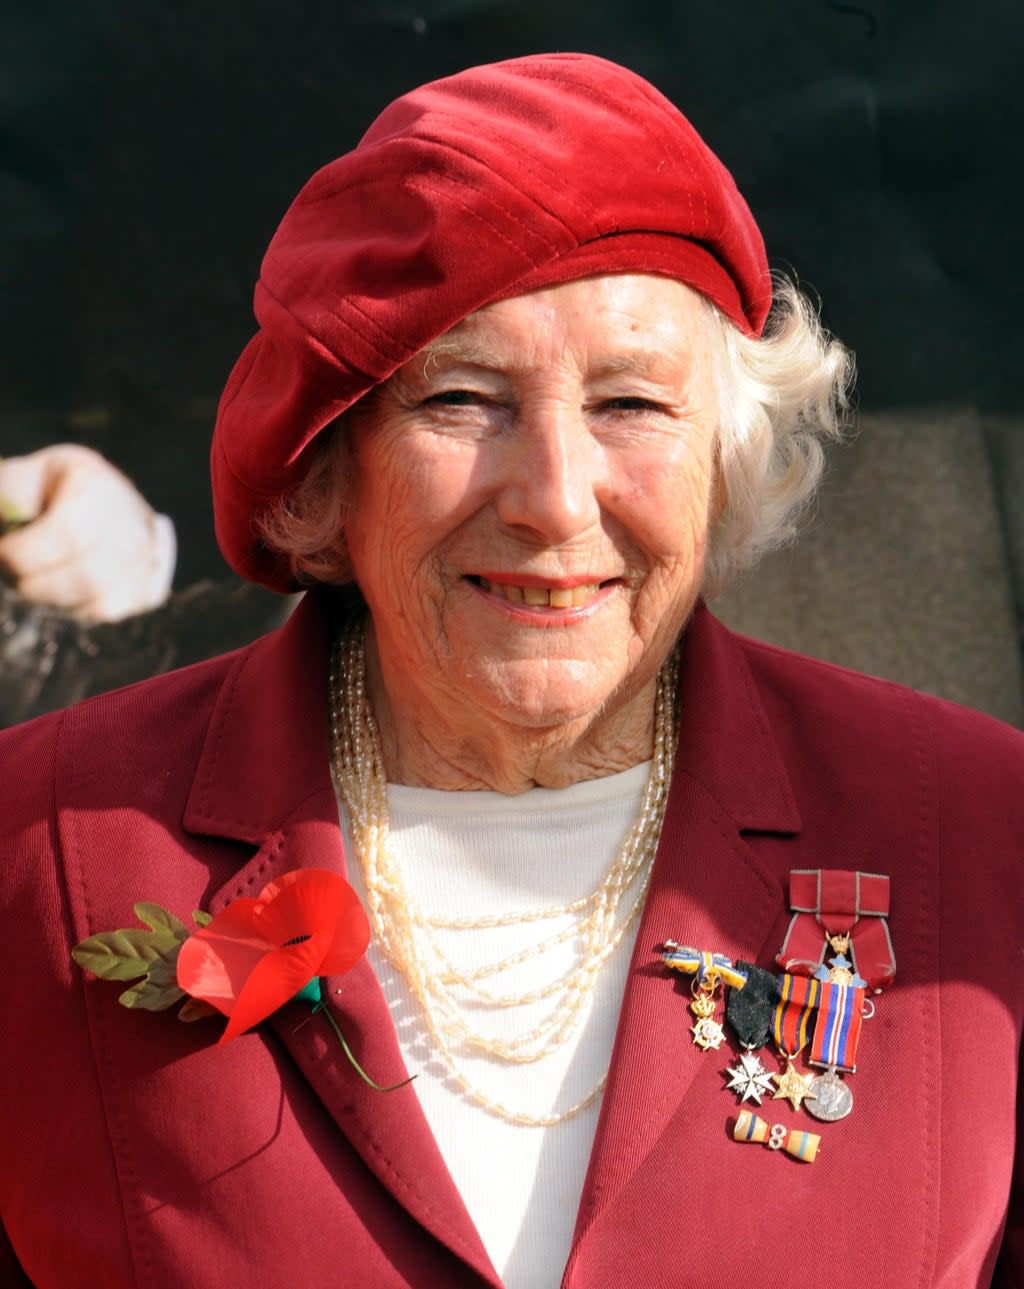 Dame Vera Lynn’s daughter has designed a jewellery collection in her mother’s memory (Zak Hussein/PA) (PA Wire)